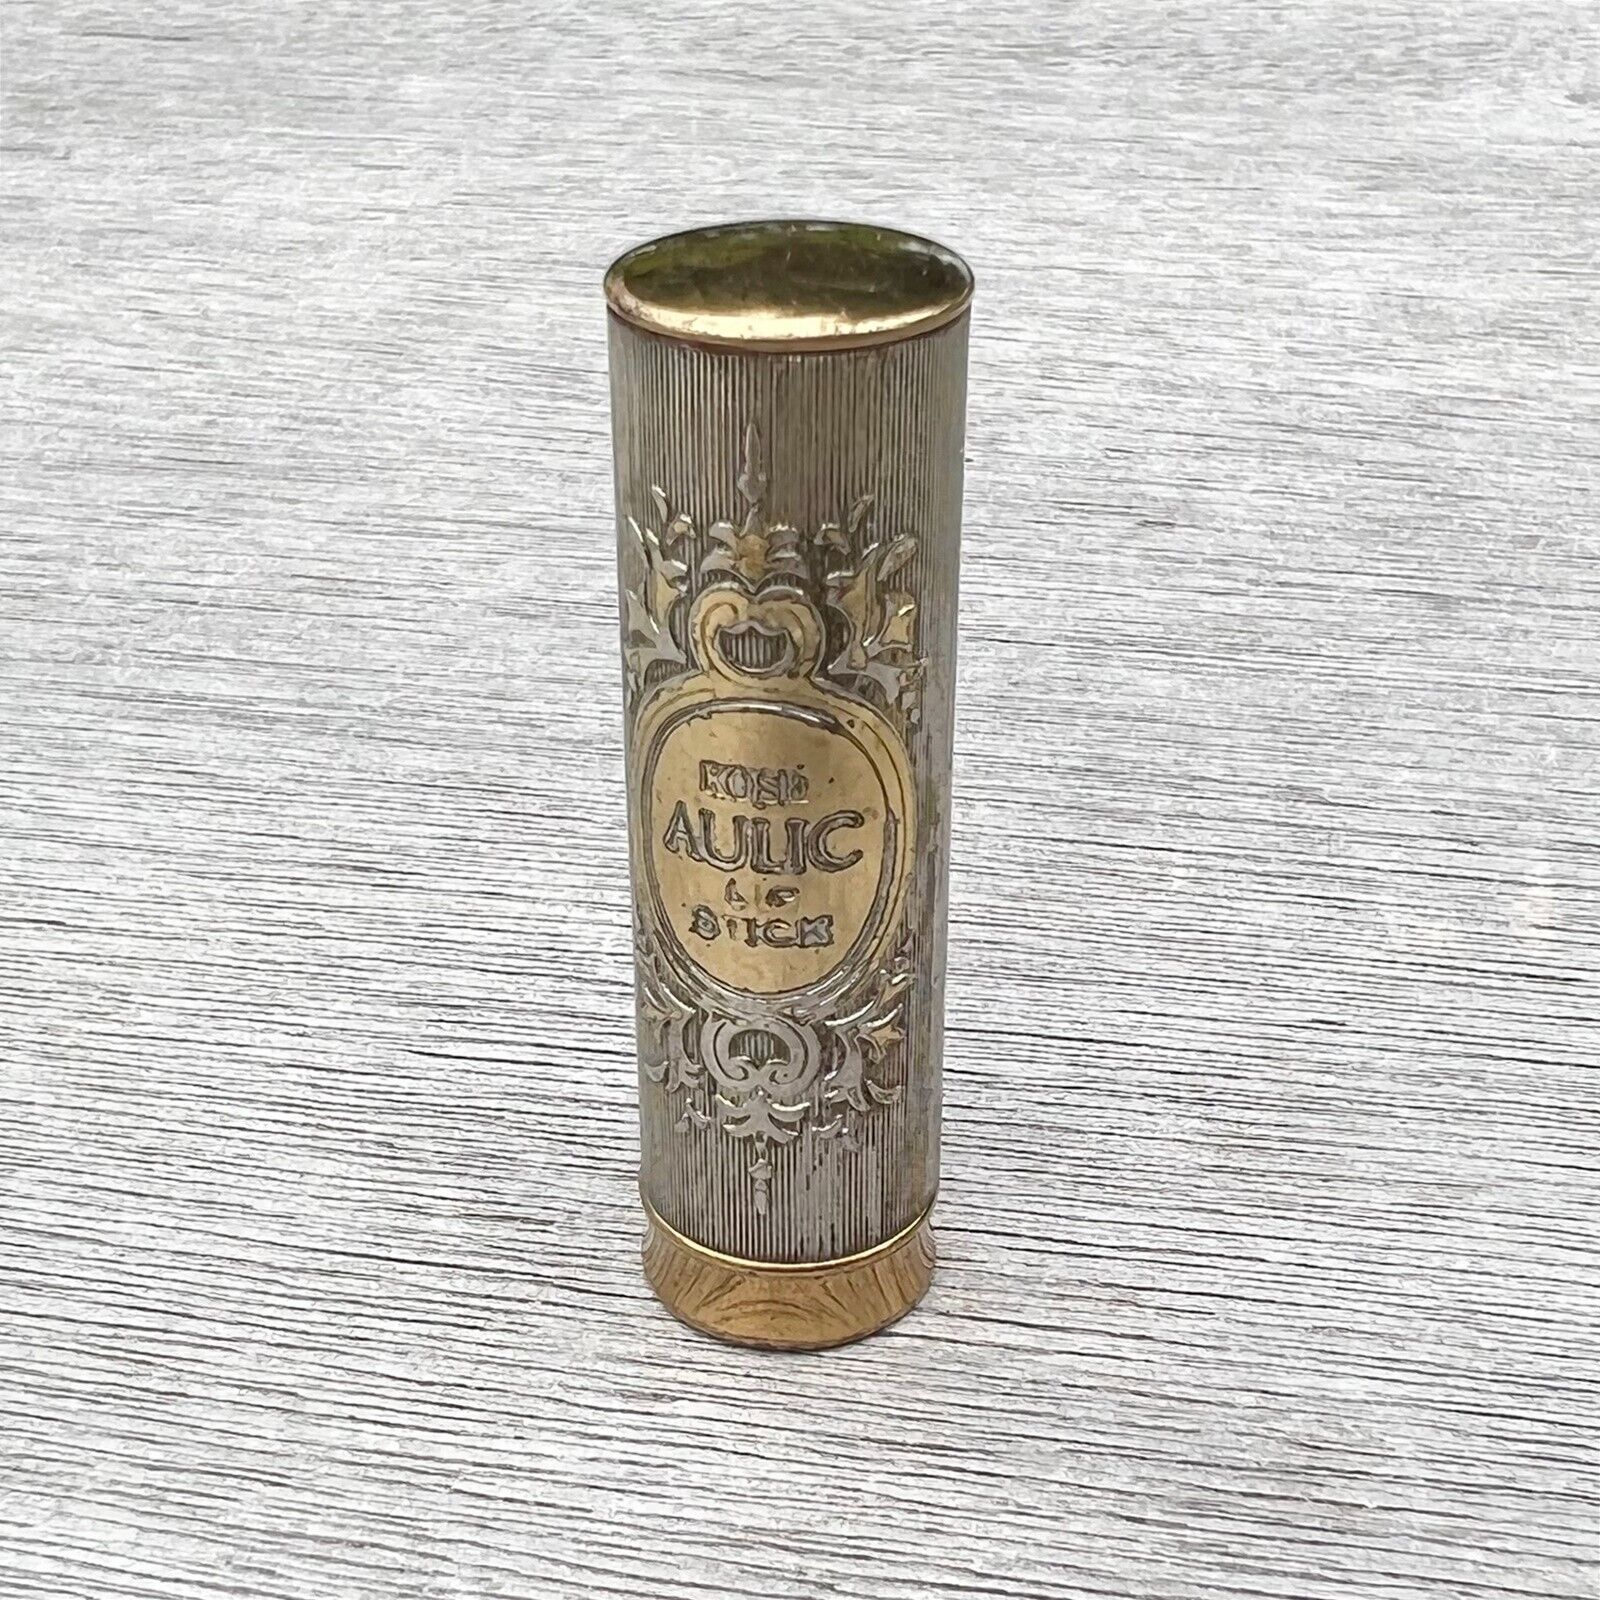 Vintage 1967 KOSE Aulic Lipstick Tube Rare Japanese Collectible Makeup Cosmetic